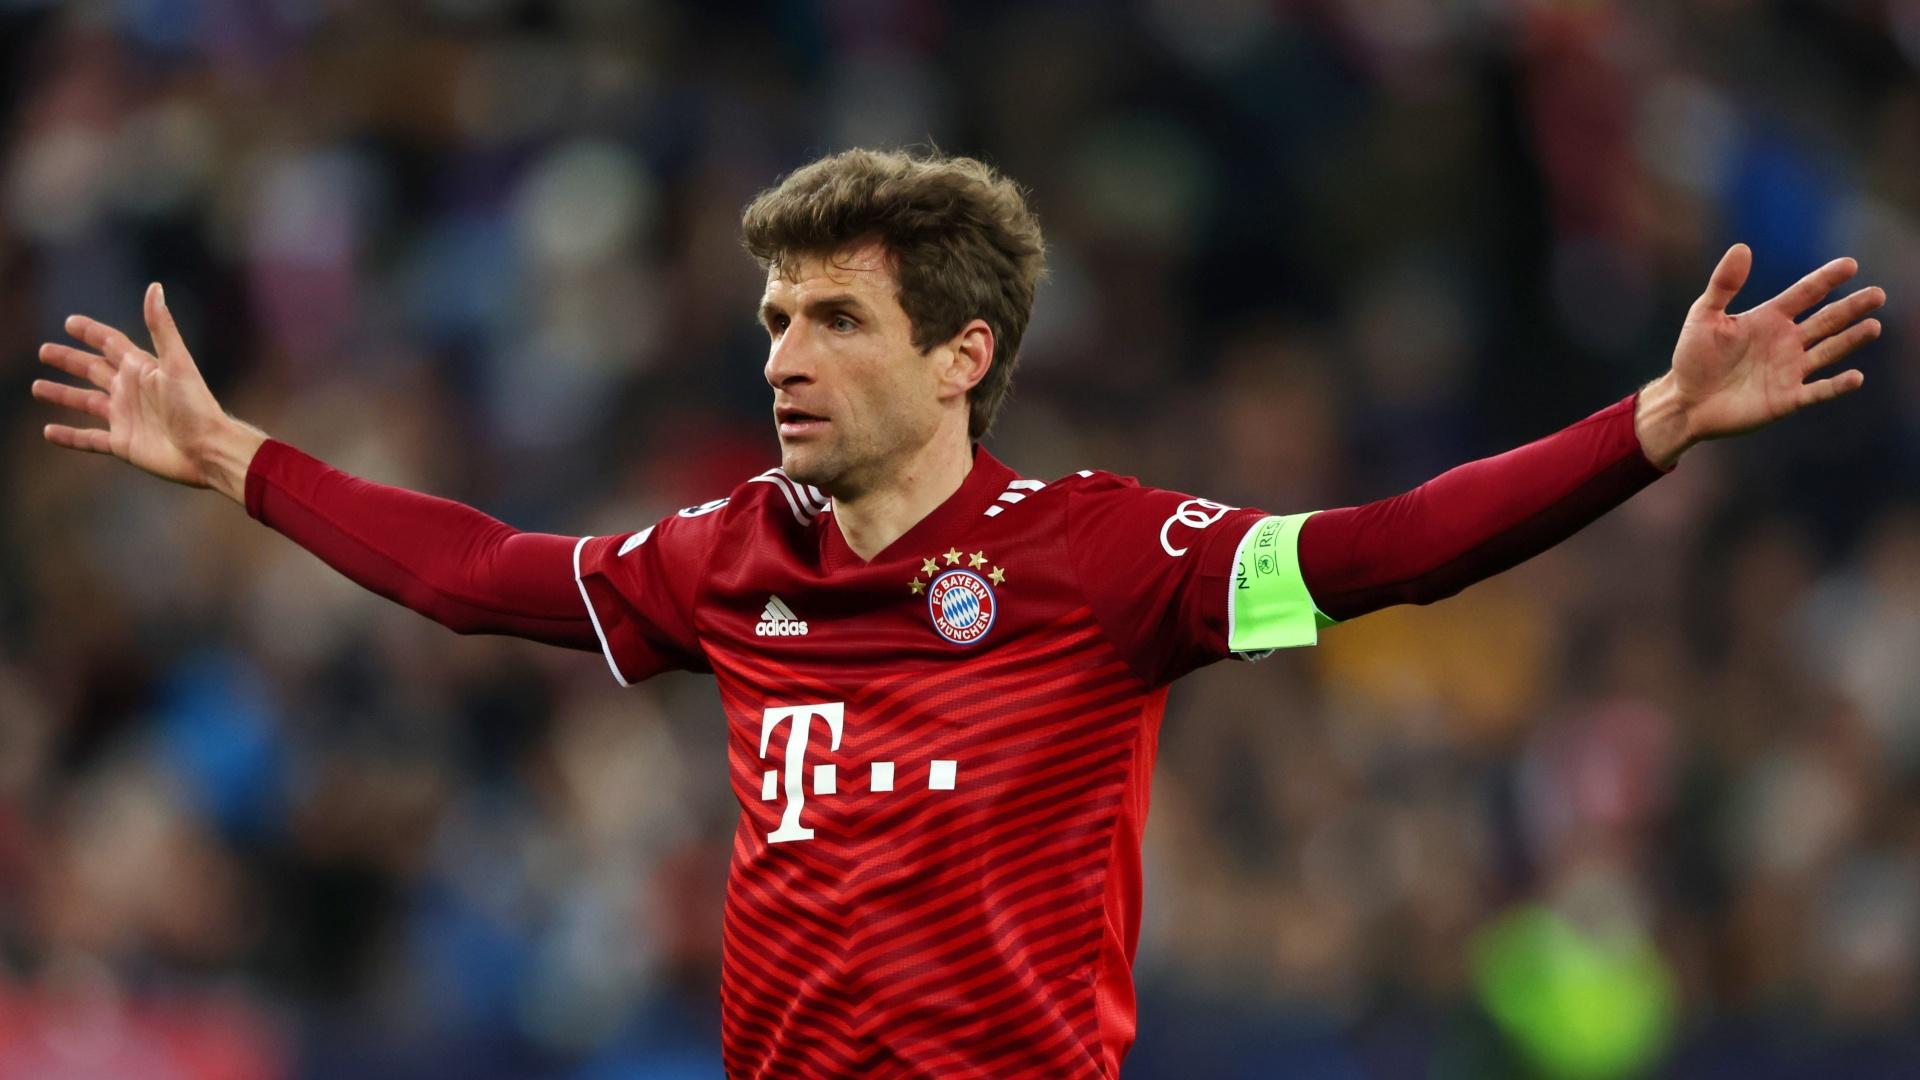 RB Salzburg vs. Bayern Munich result, highlights from UEFA Champions League Round of 16